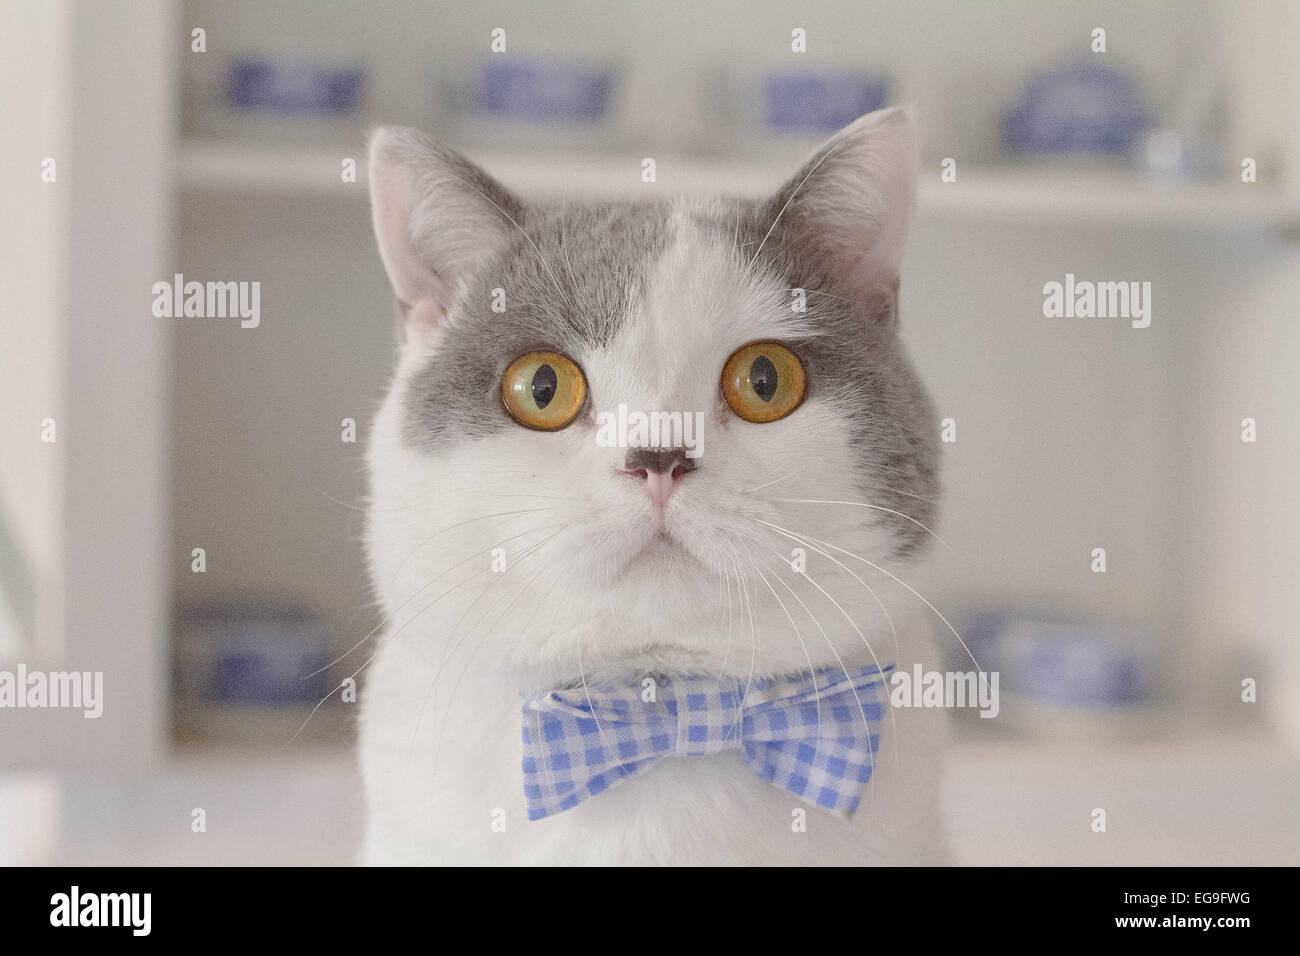 Portrait of British shorthair cat wearing a bow tie Stock Photo